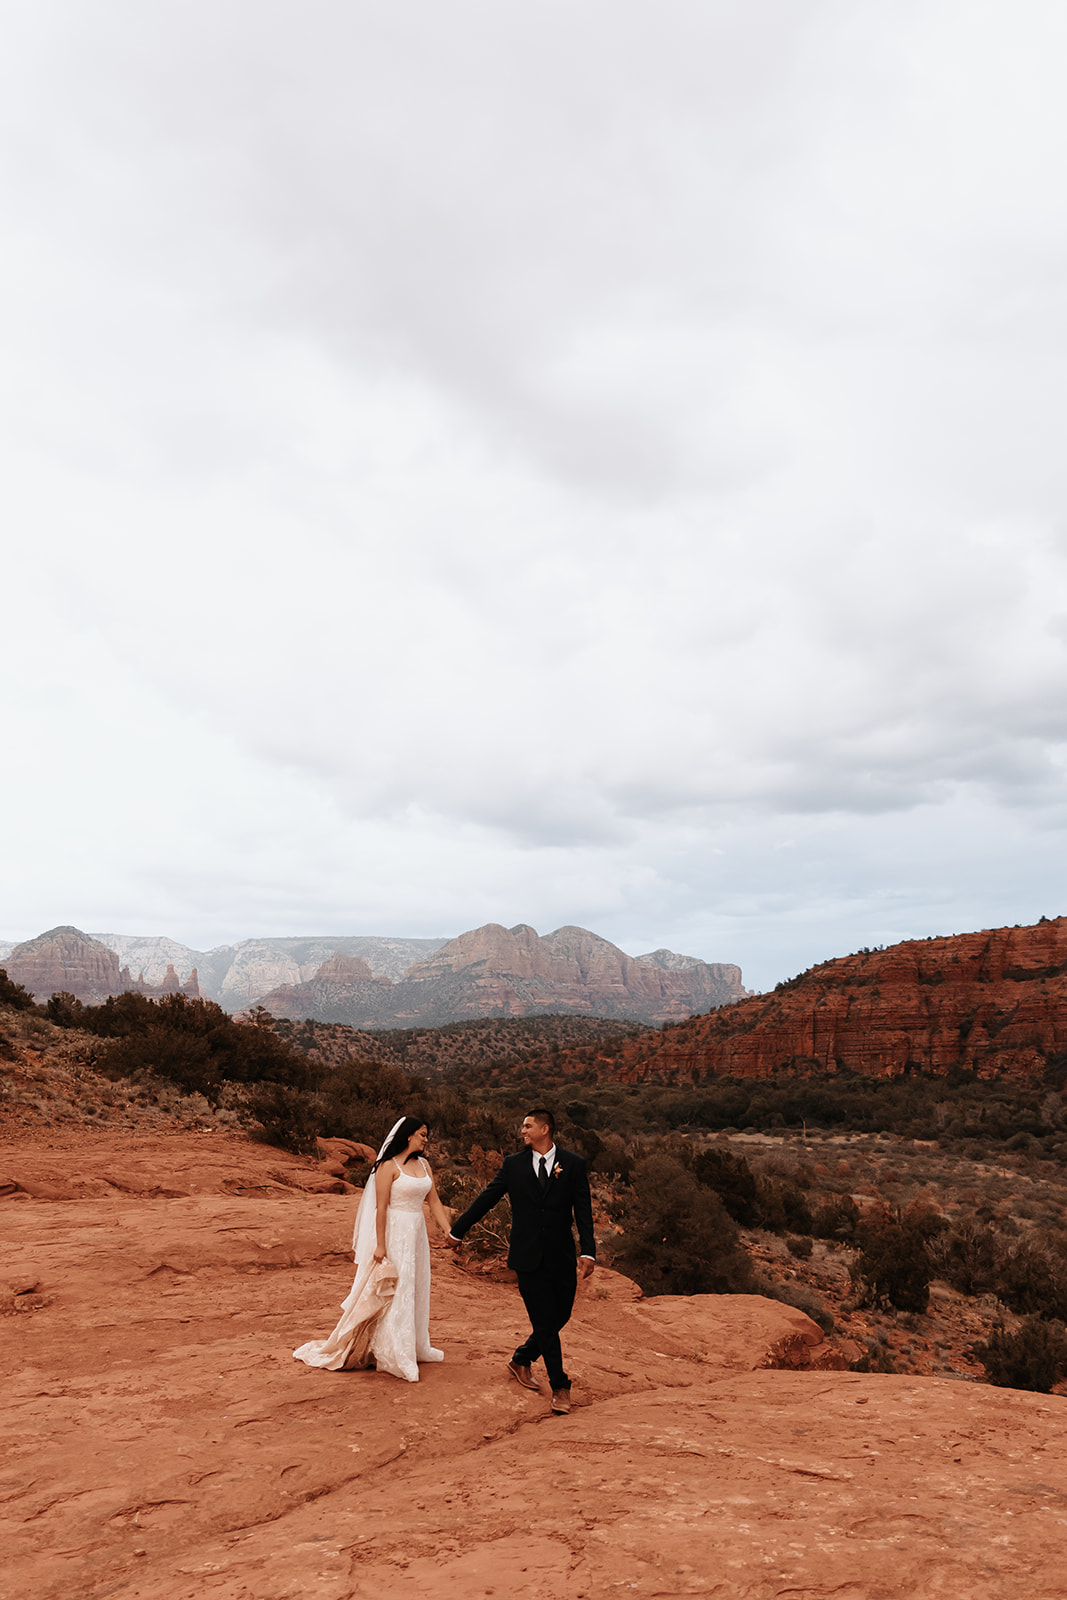 A couple who eloped in sedona walking across the red rocks